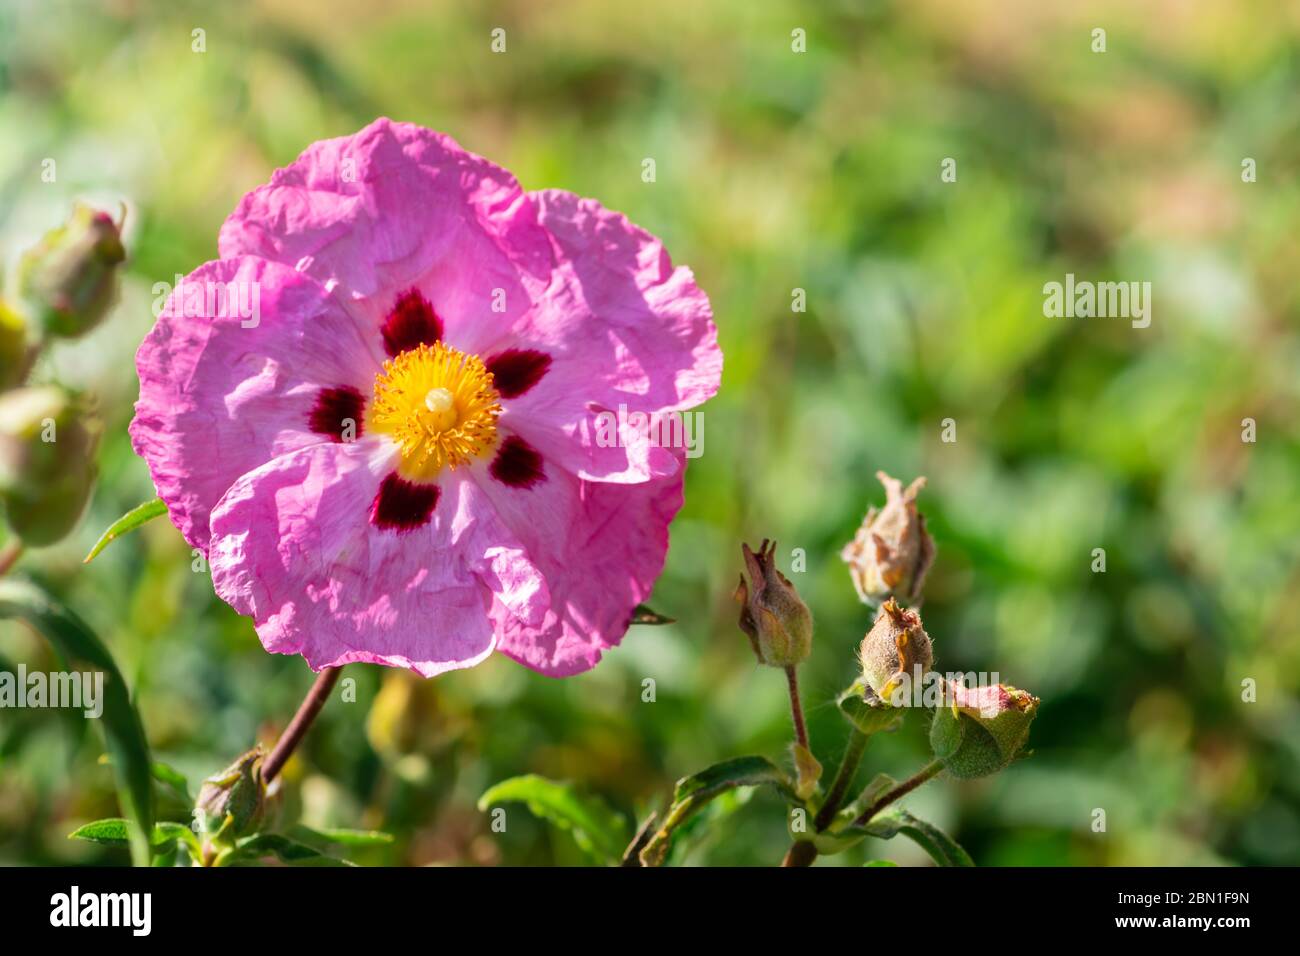 Flower of Cistus purpureus close up. Big pink orchid rockrose in the garden with copy space for text. Stock Photo